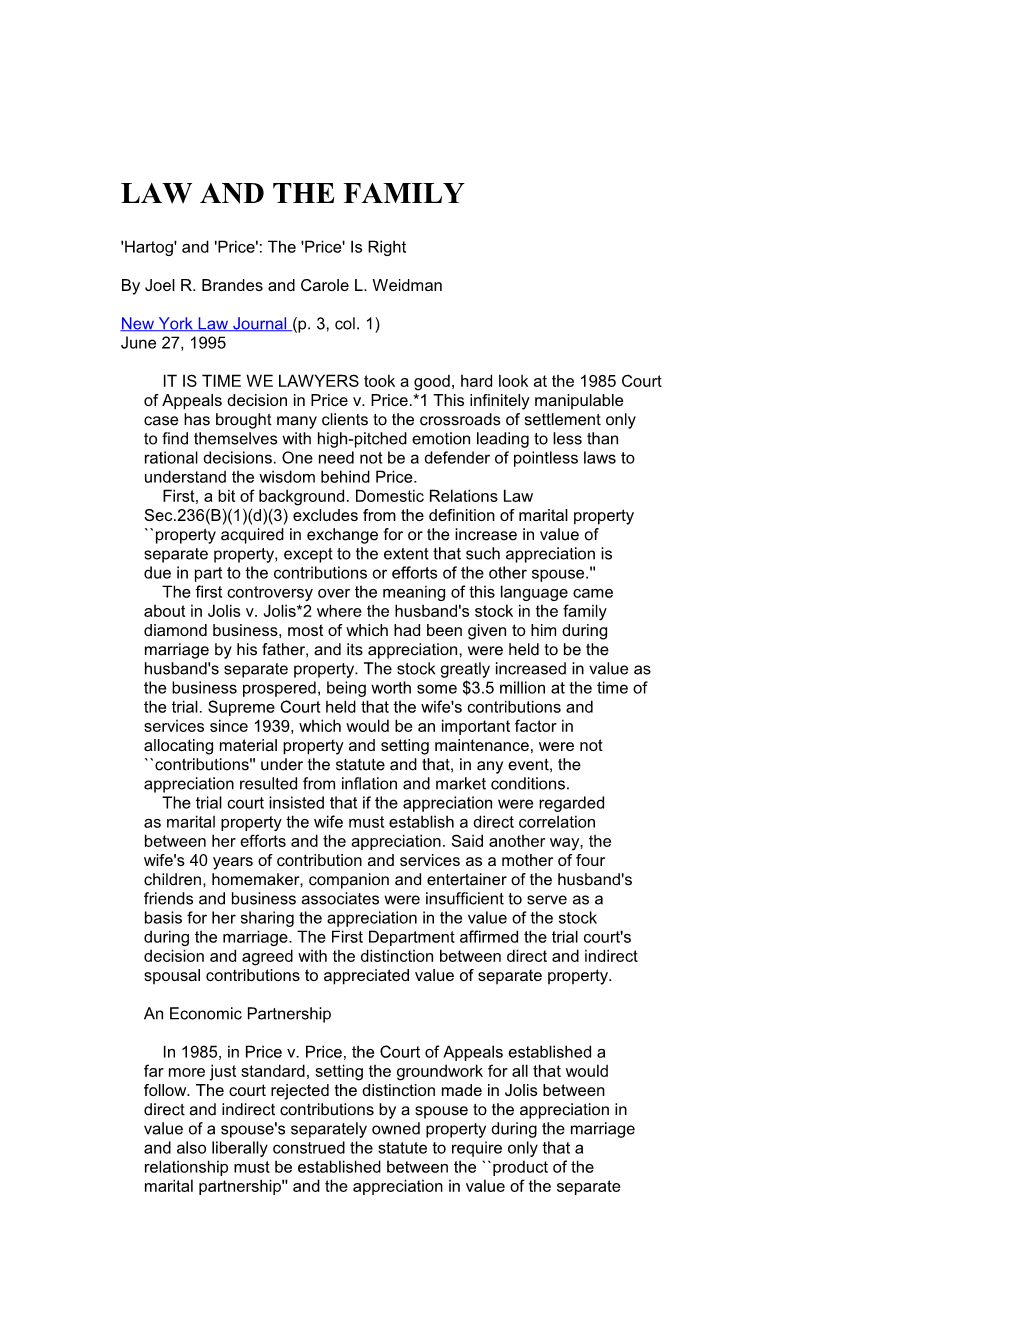 Hartog and Price. New York Divorce and Family Law, the Definitive Site About Divorce, Child